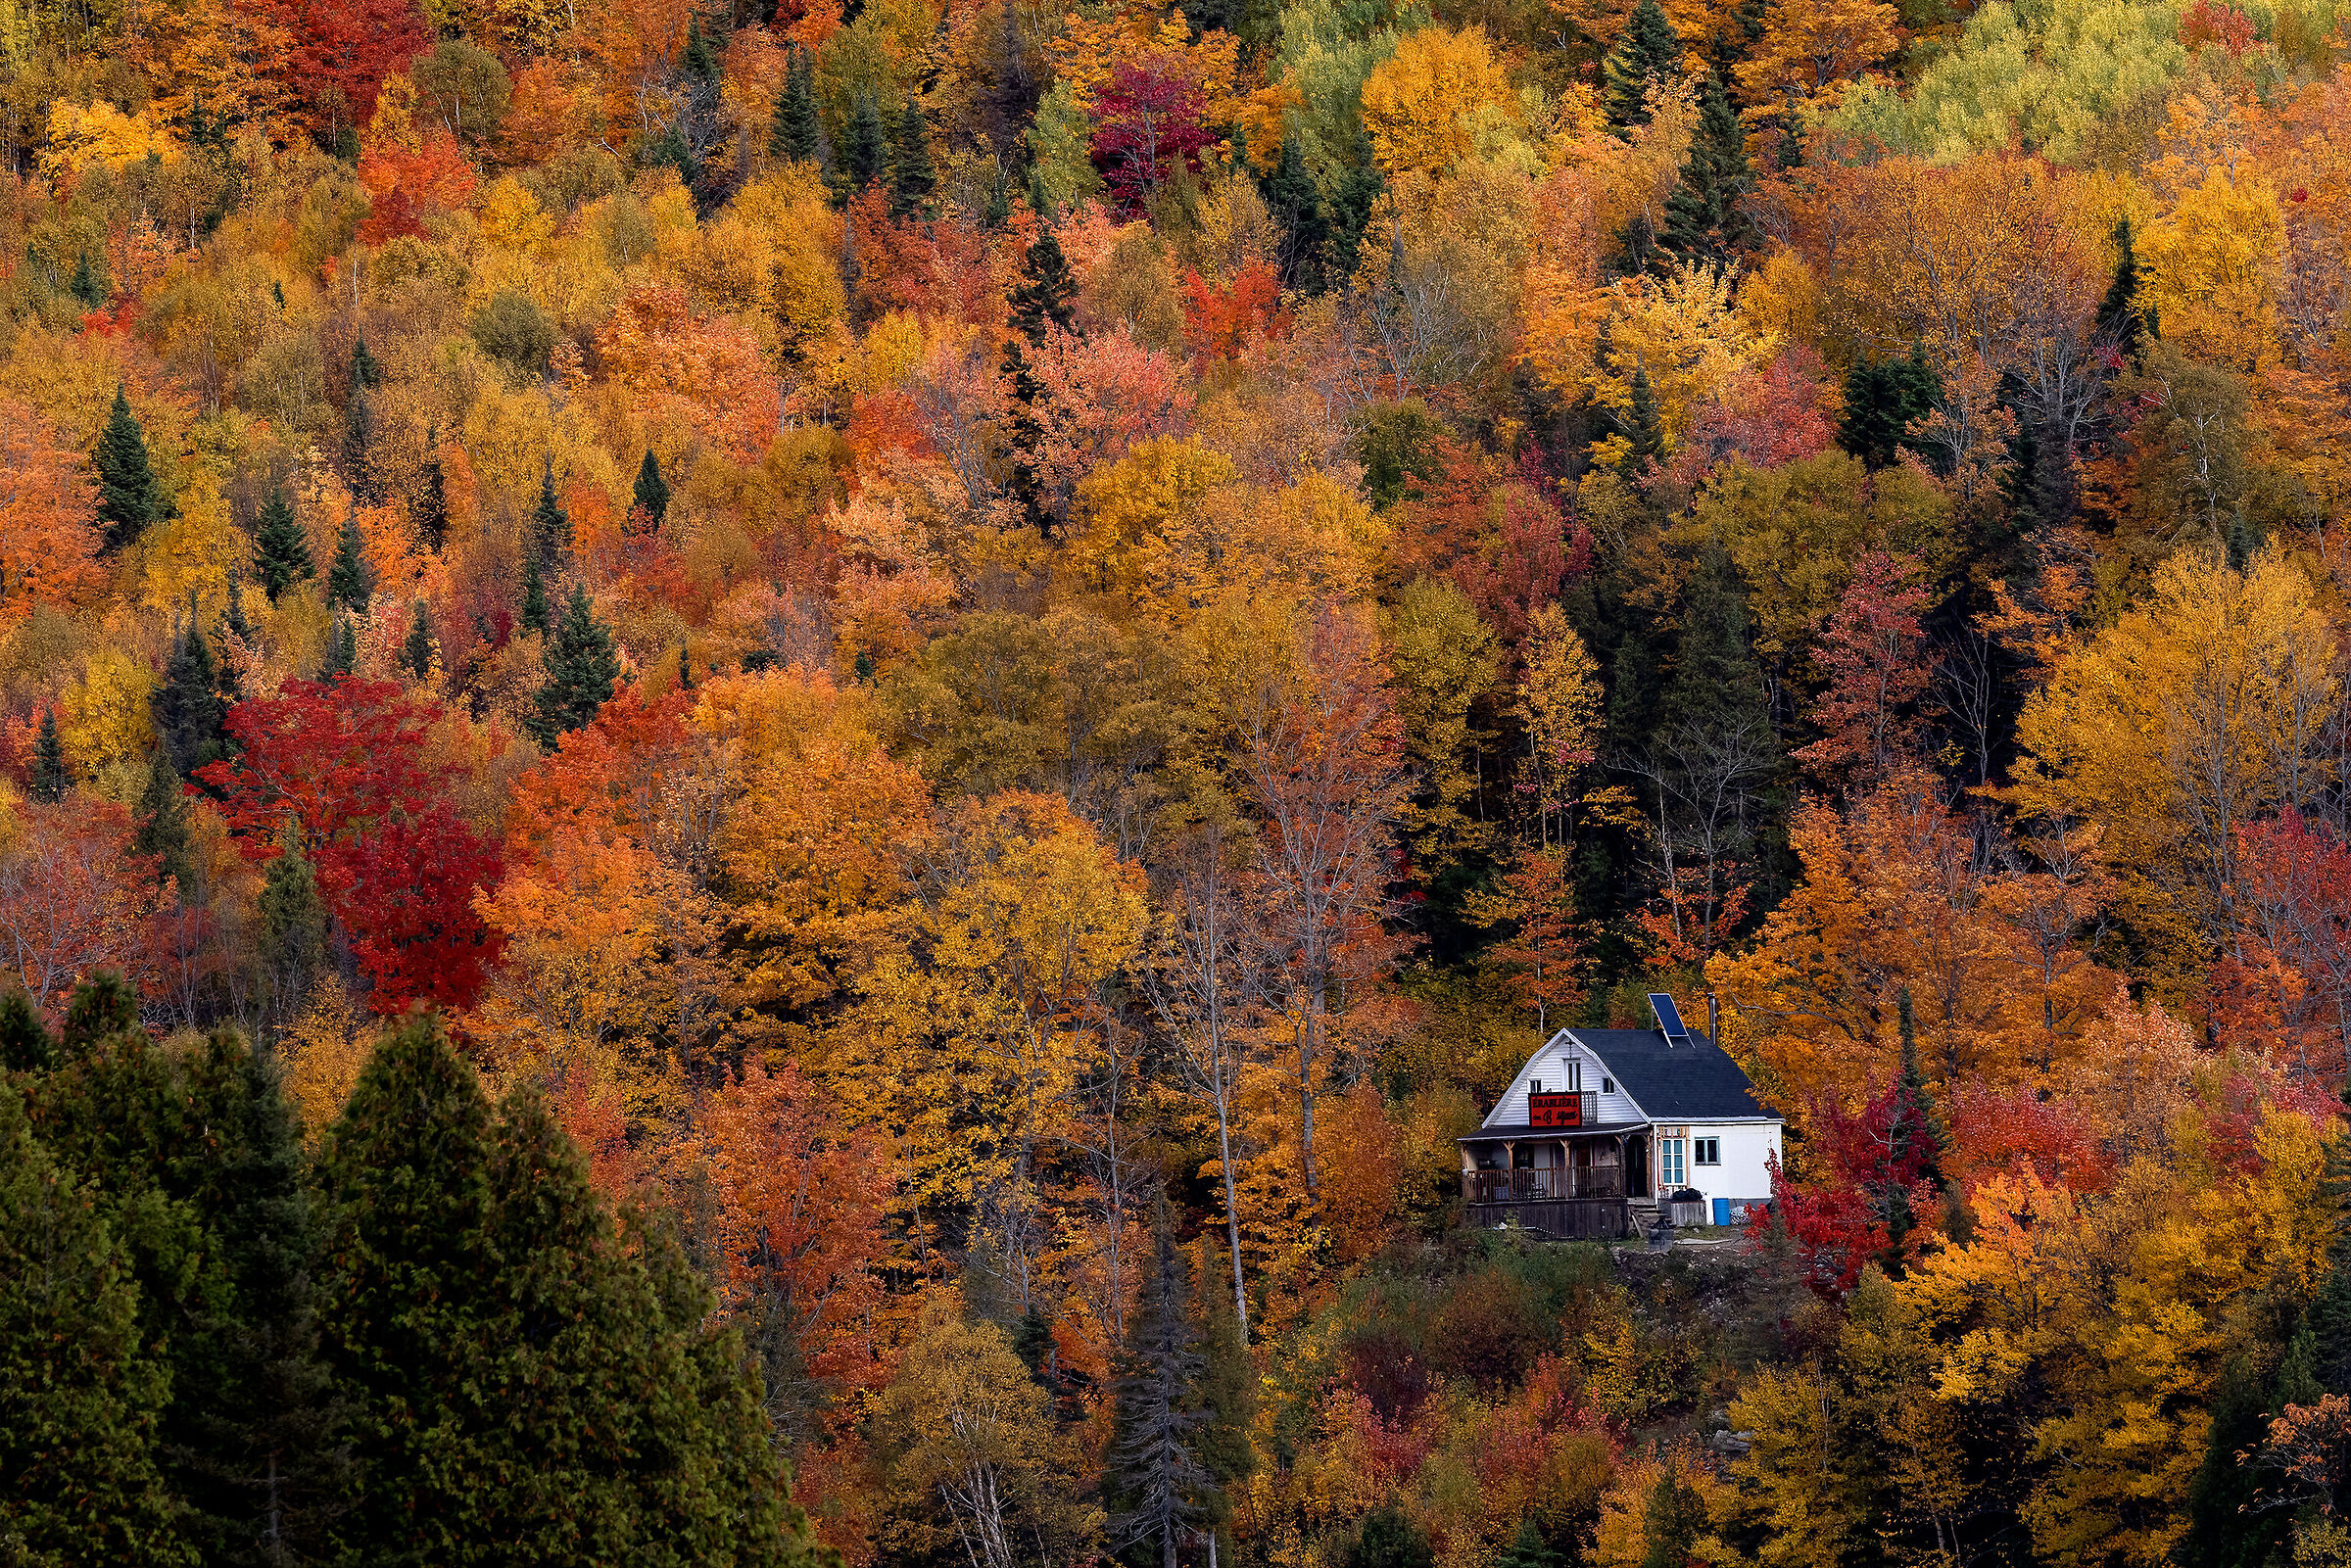 The little house in Canada...